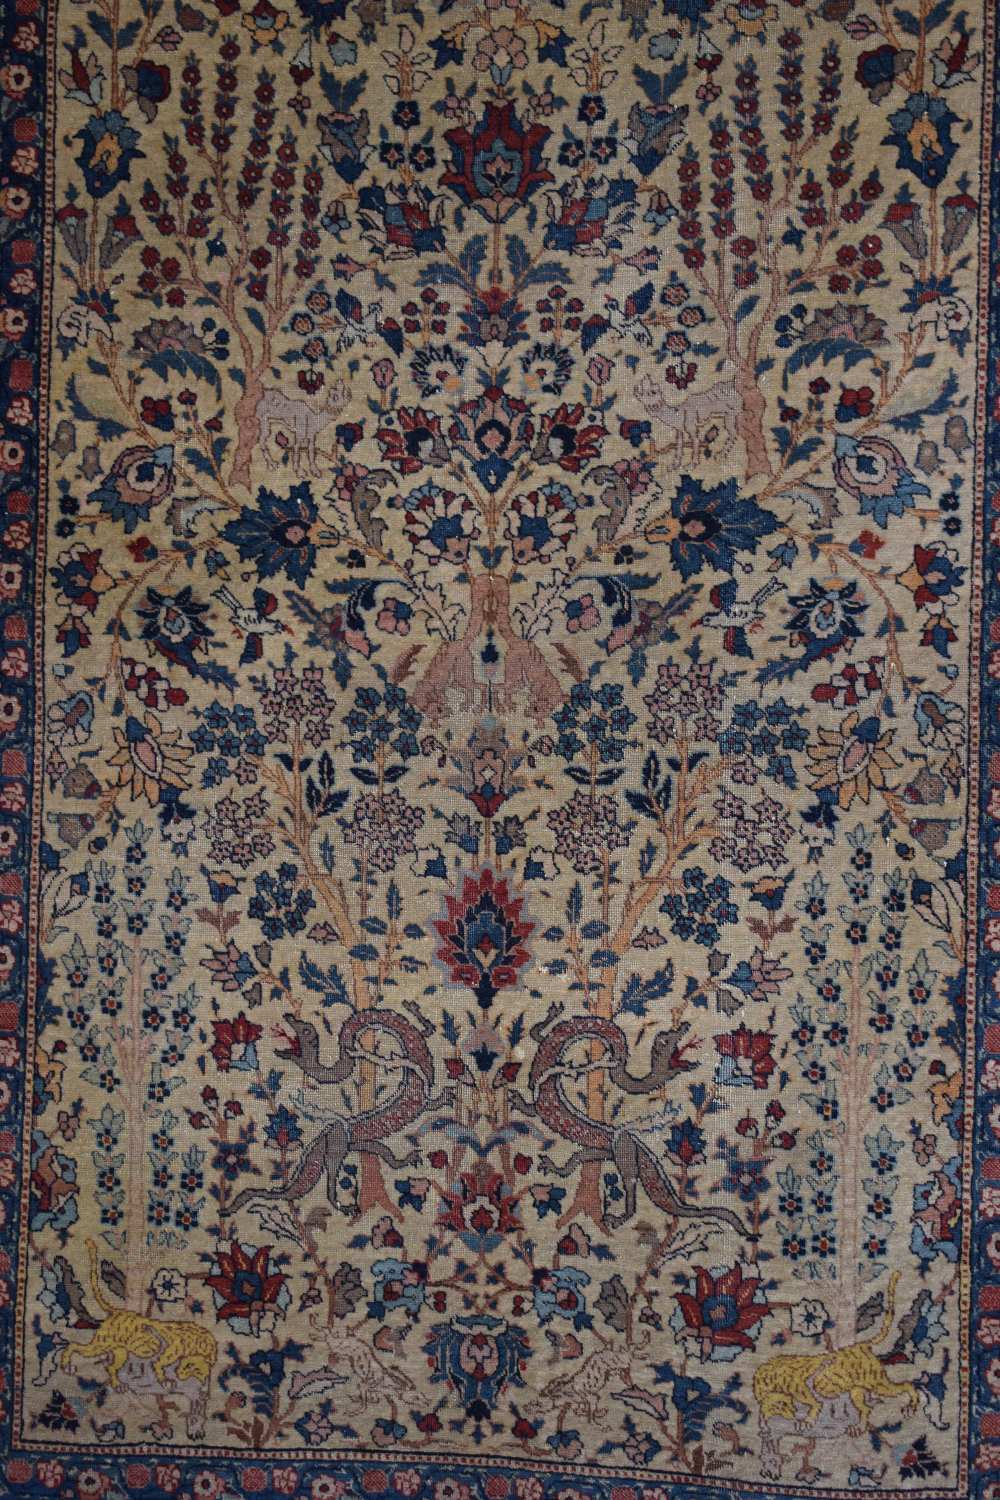 Tabriz pictorial rug, north west Persia, early 20th century, 6ft. 5in. X 4ft. 7in. 1.96m. X 1.40m. - Image 8 of 9